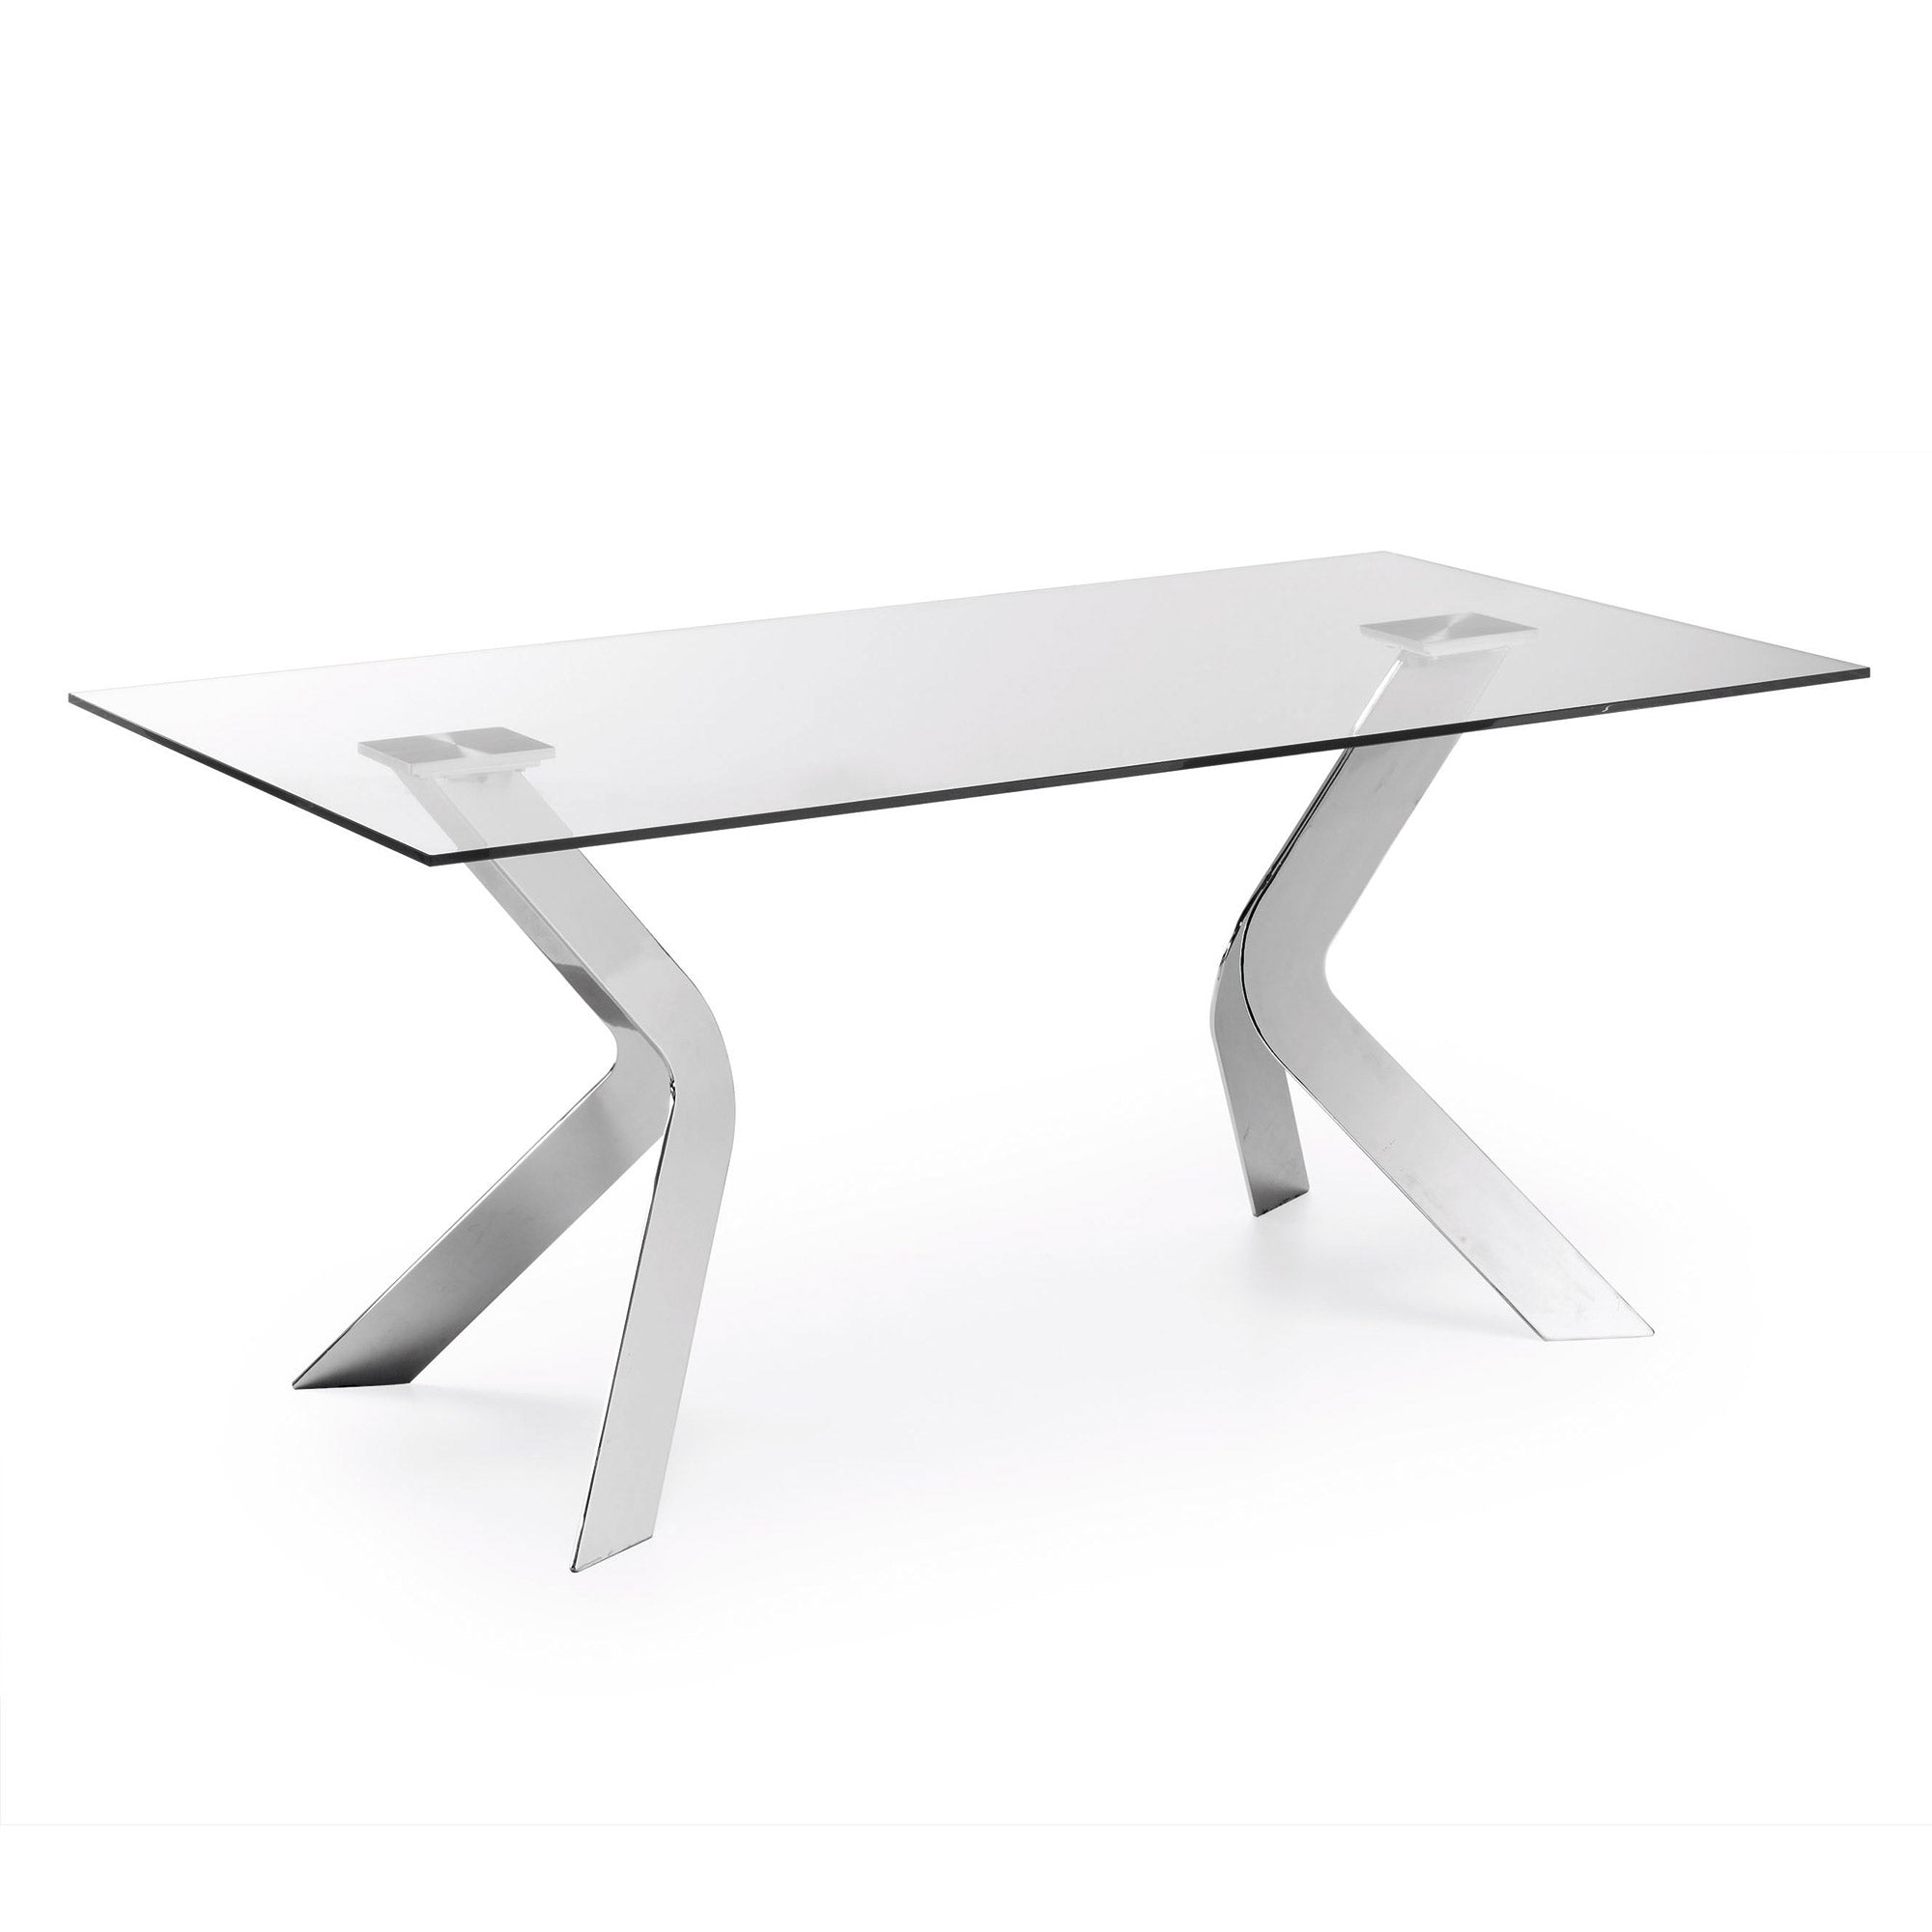 Westport glass table with steel legs with chrome finish 180 x 90 cm